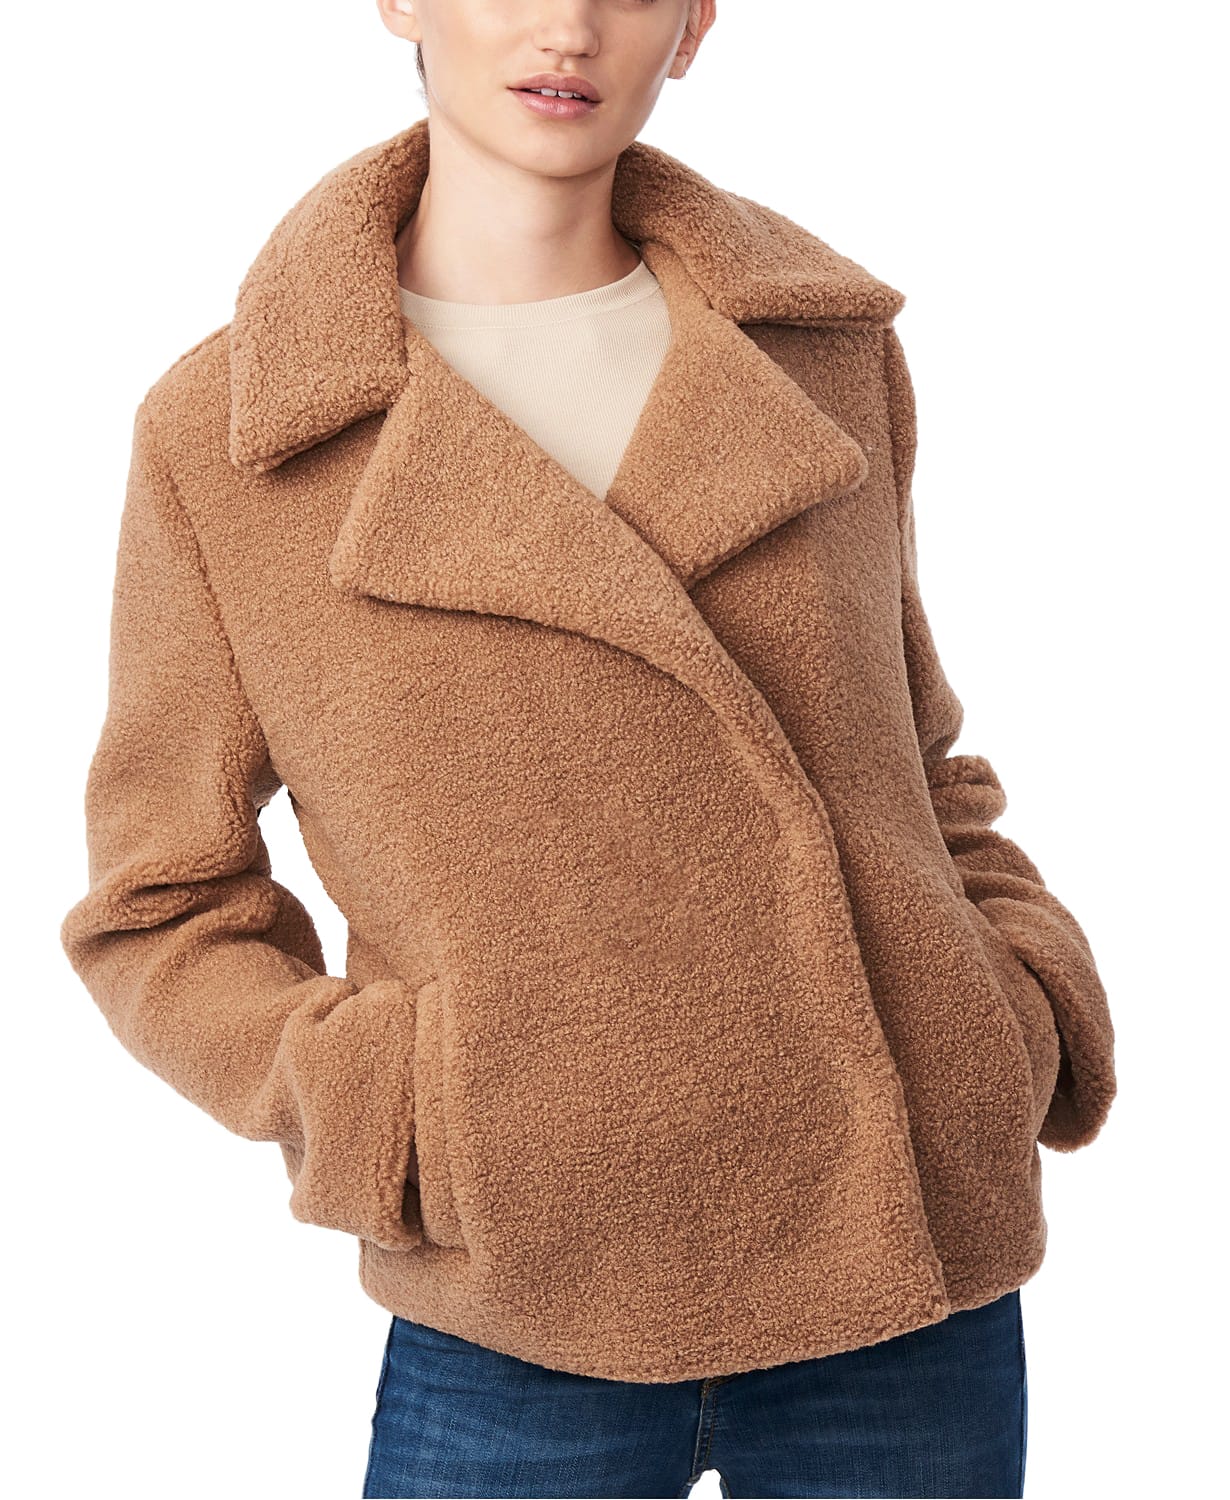 woocommerce-673321-2209615.cloudwaysapps.com-collection-b-womens-brown-faux-fur-teddy-coat-jacket